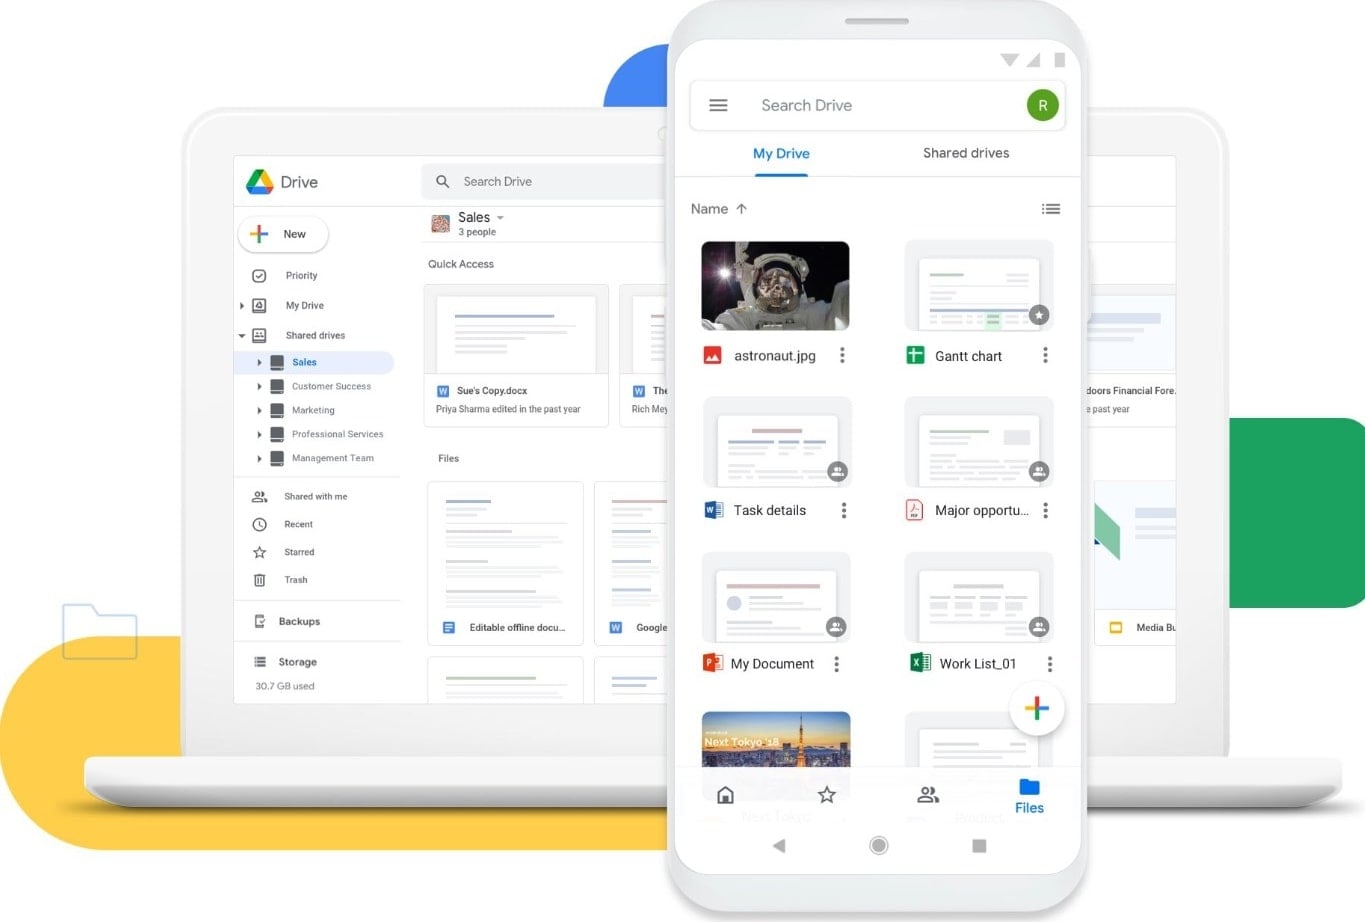 google drive interface on different devices